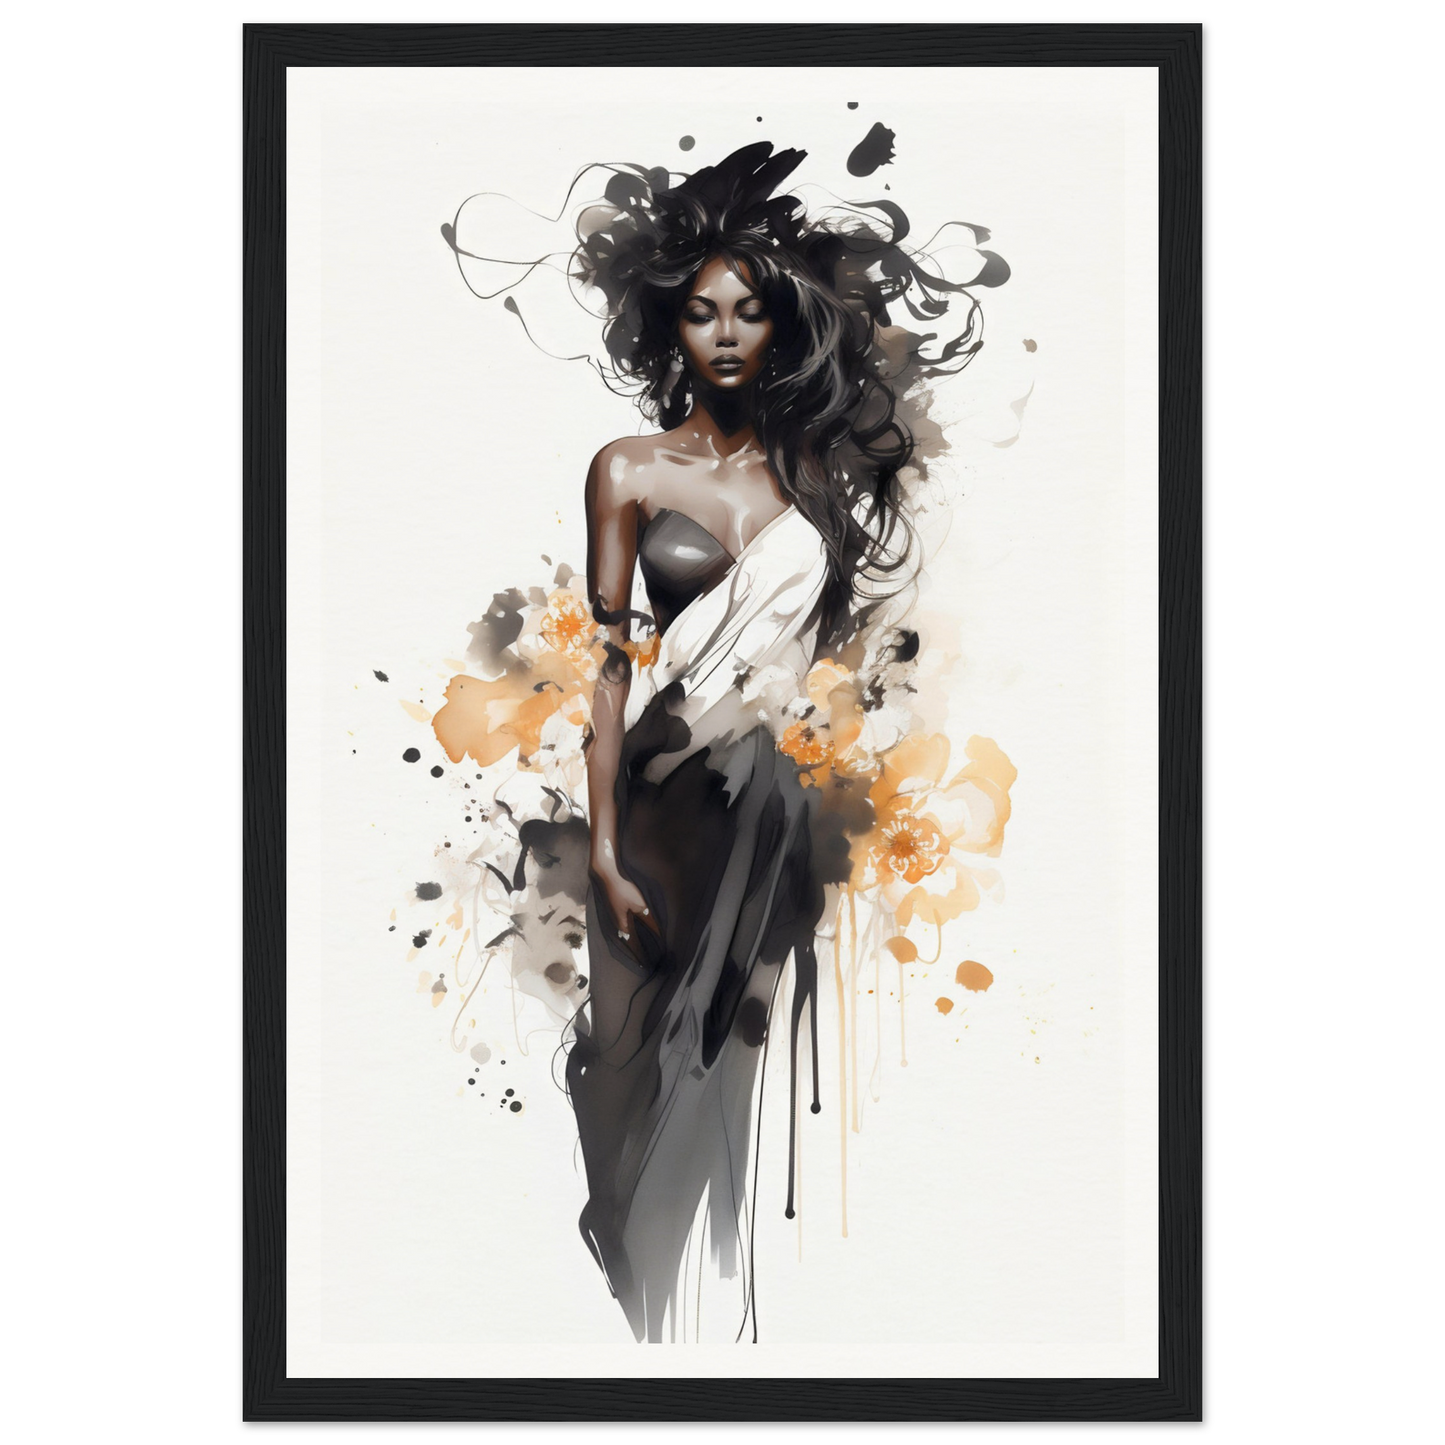 An illustration of a woman in a black dress with splatters, perfect as Essential Elegance The Oracle Windows™ Collection wall art for my wall.